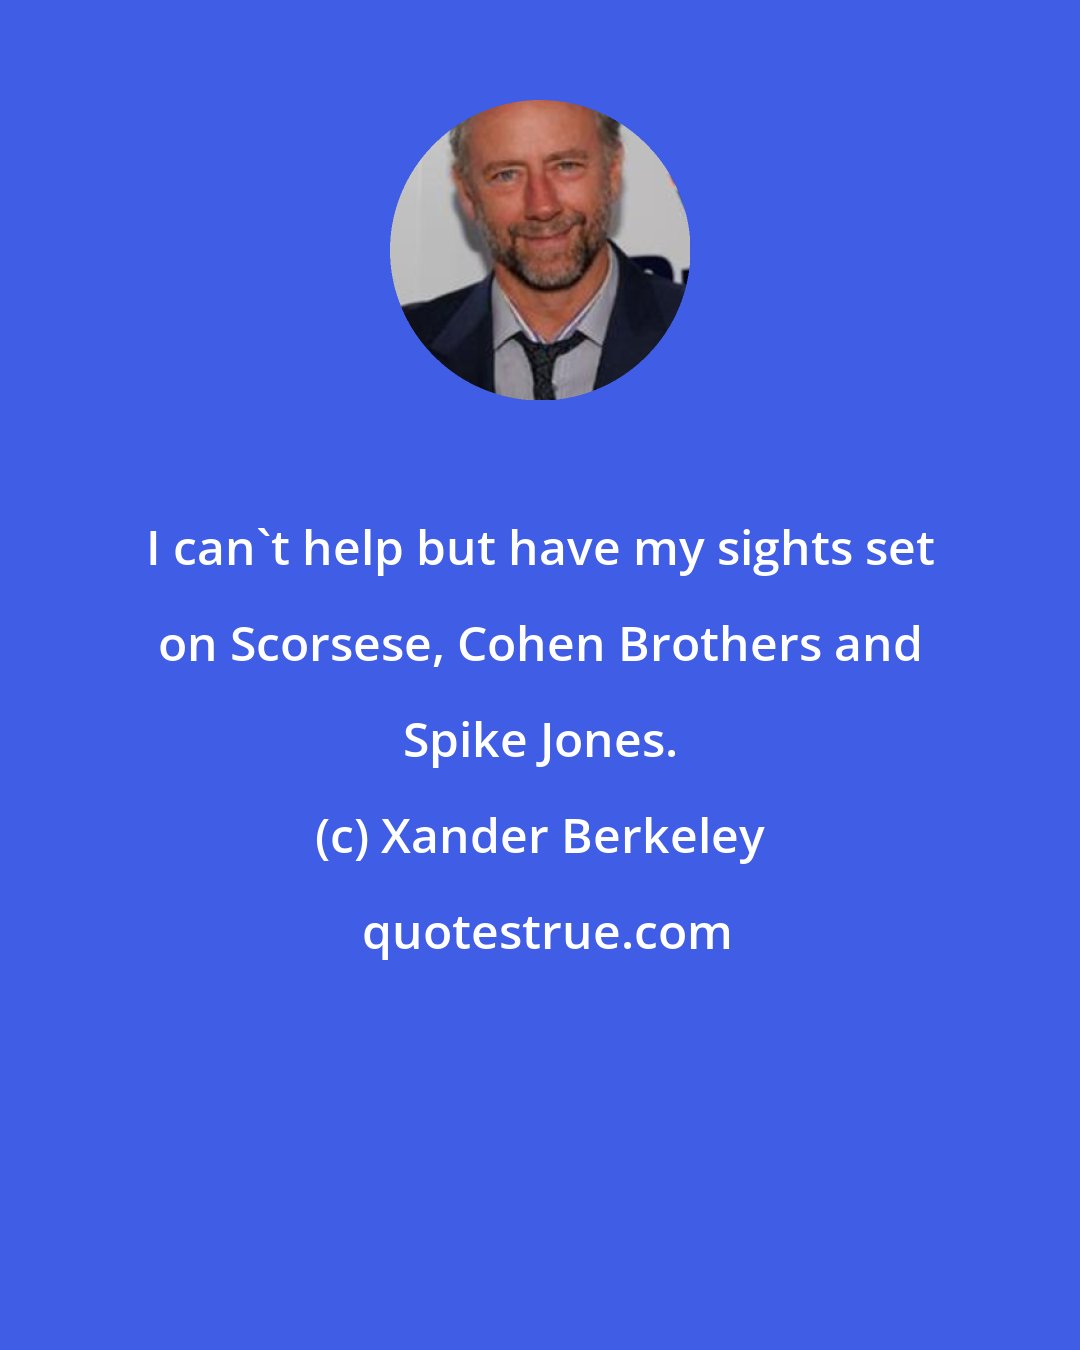 Xander Berkeley: I can't help but have my sights set on Scorsese, Cohen Brothers and Spike Jones.